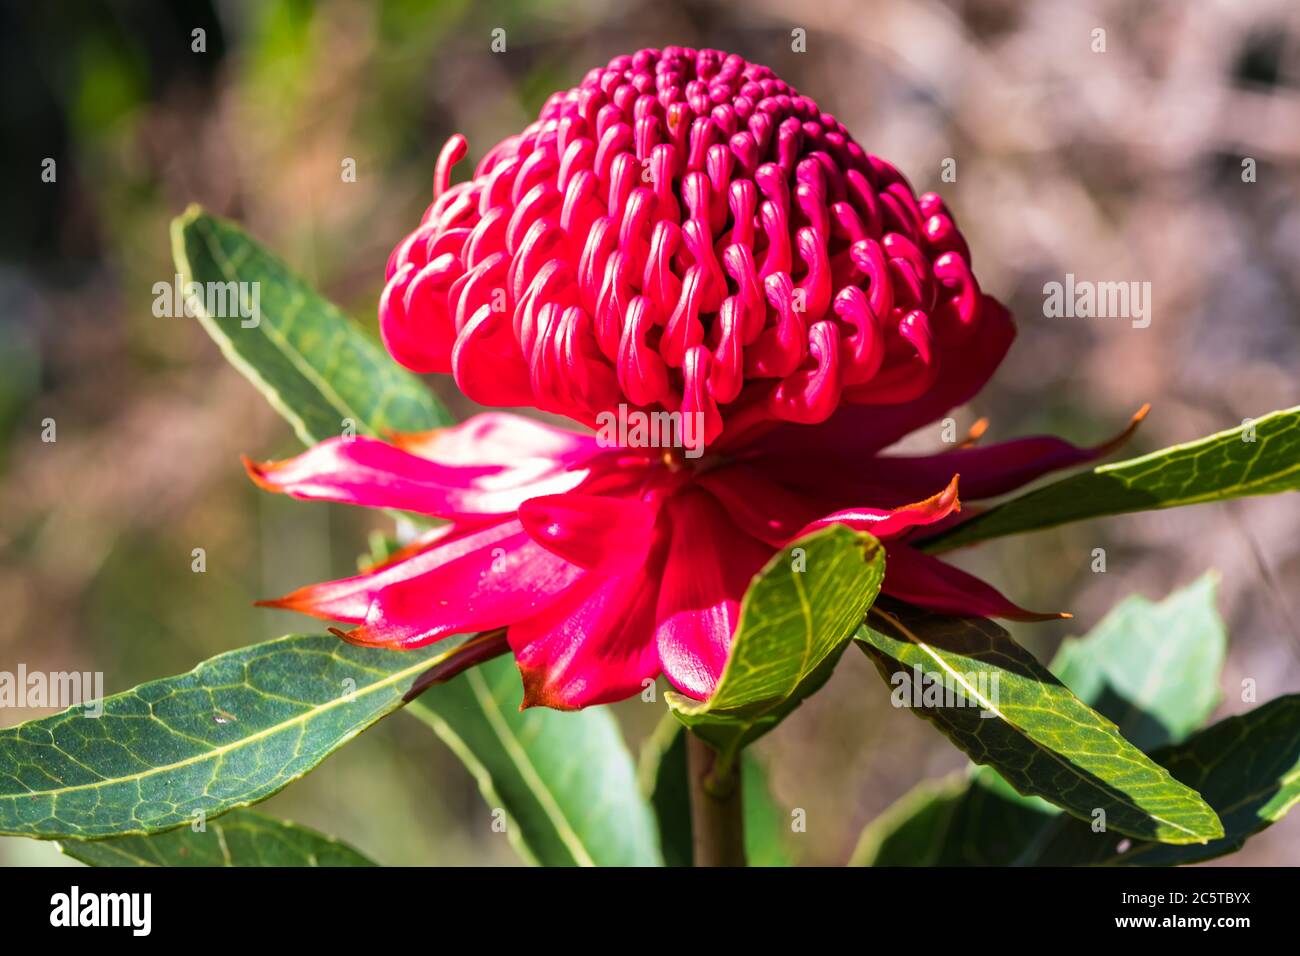 The Waratah is an Australian bush native  The most well-known species in this genus is Telopea speciosissima, which has bright red flowers and is the Stock Photo